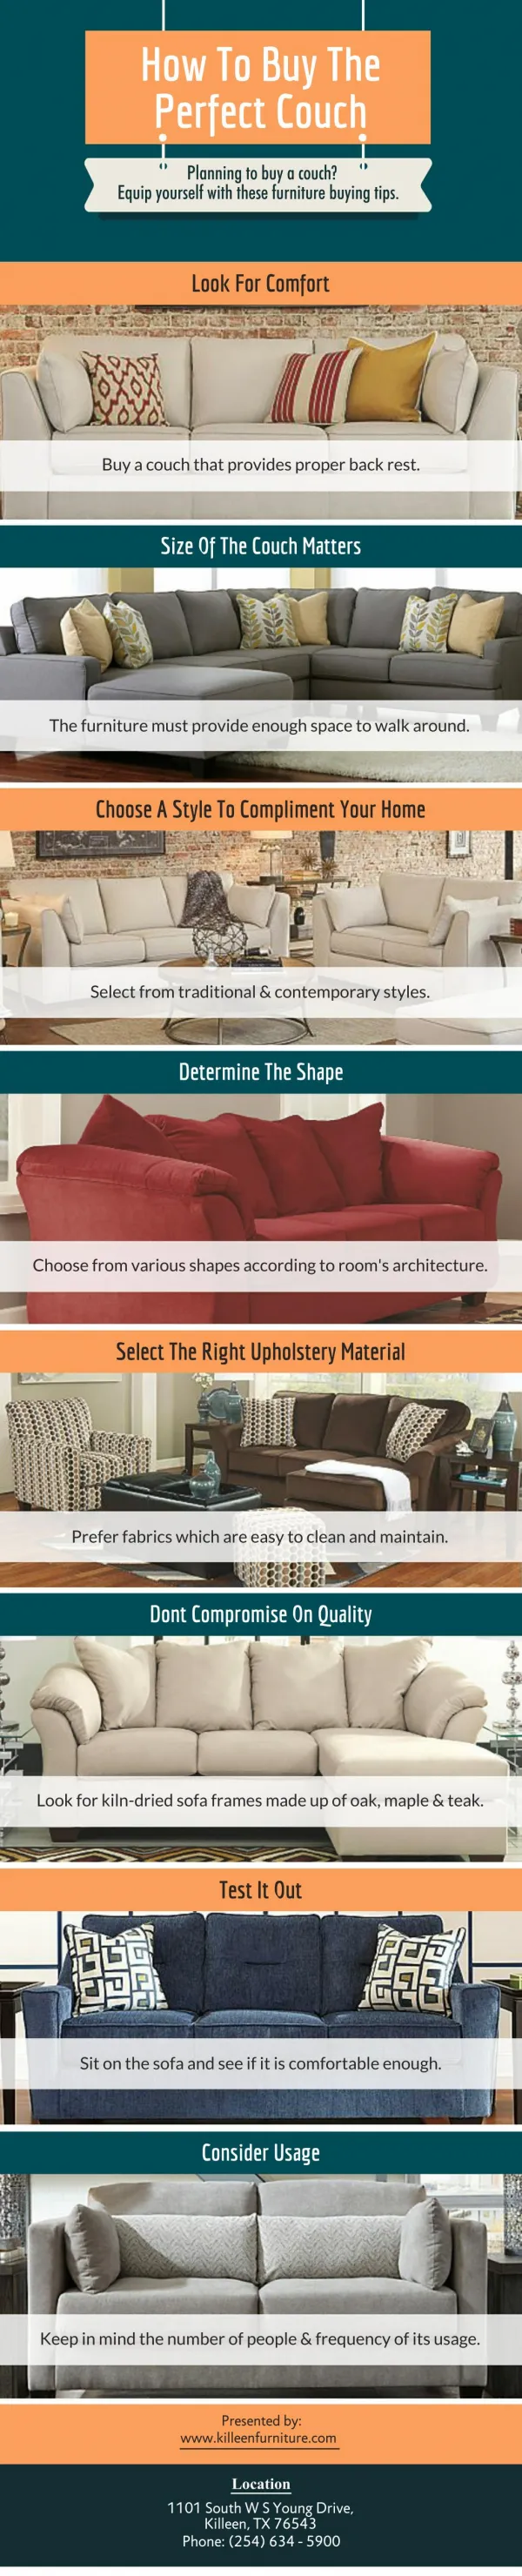 Buying The Perfect Couch